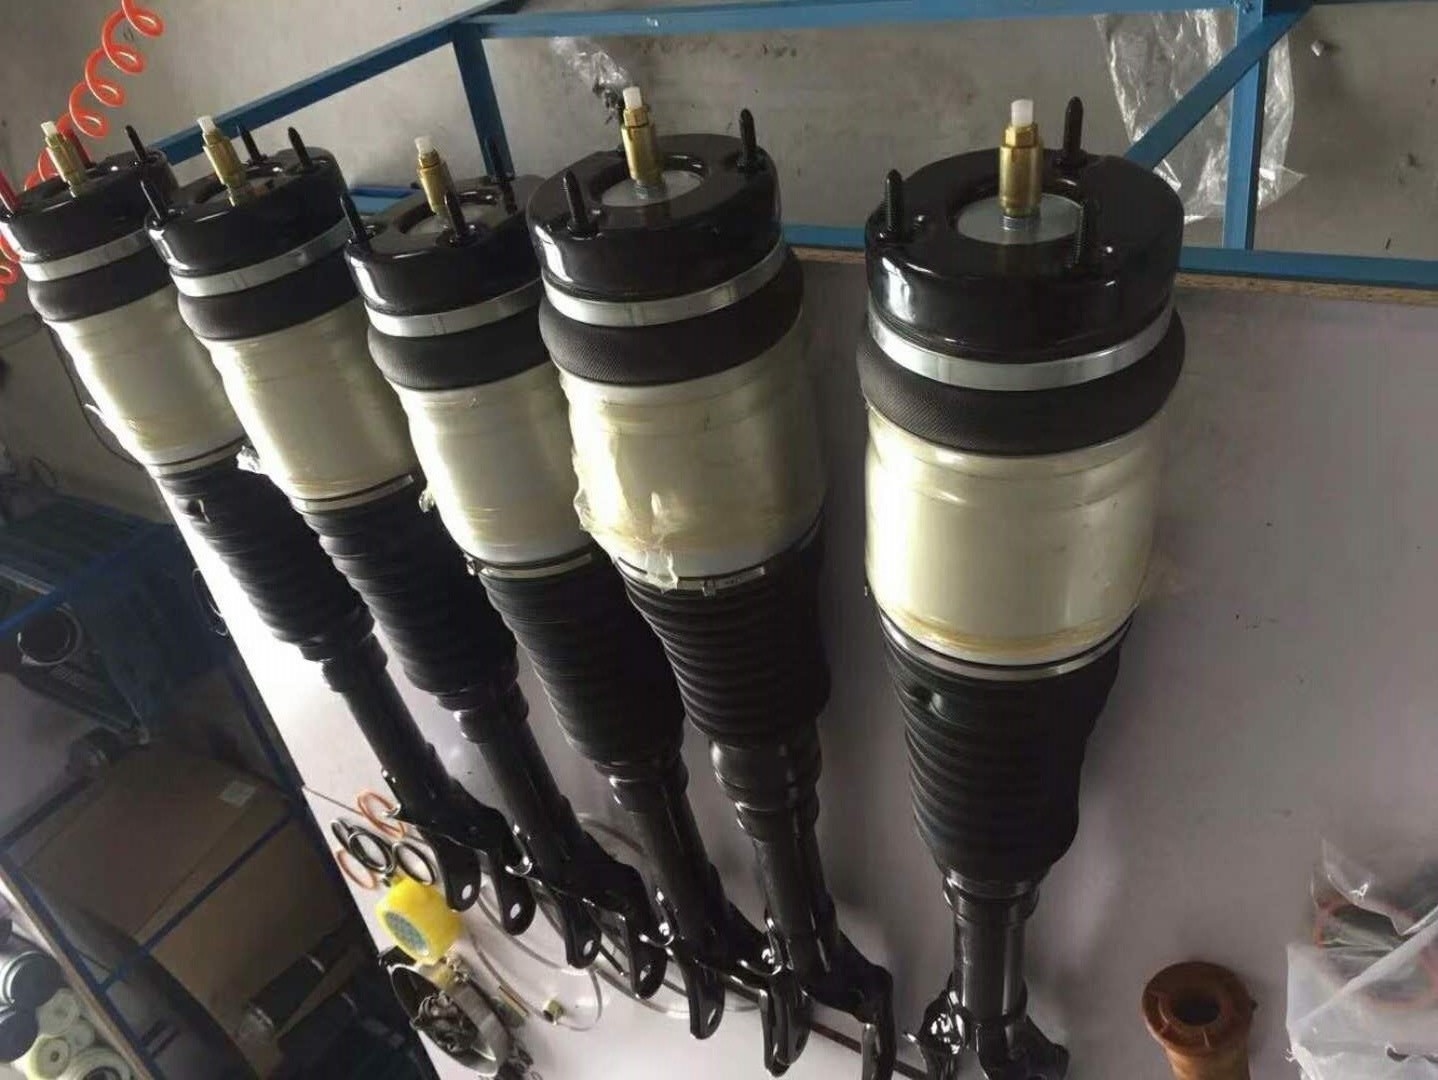 Best 68029903AE Jeep Air Suspension Kits Air Suspension Shock Front For Jeep Grand Cherokee WK2 wholesale